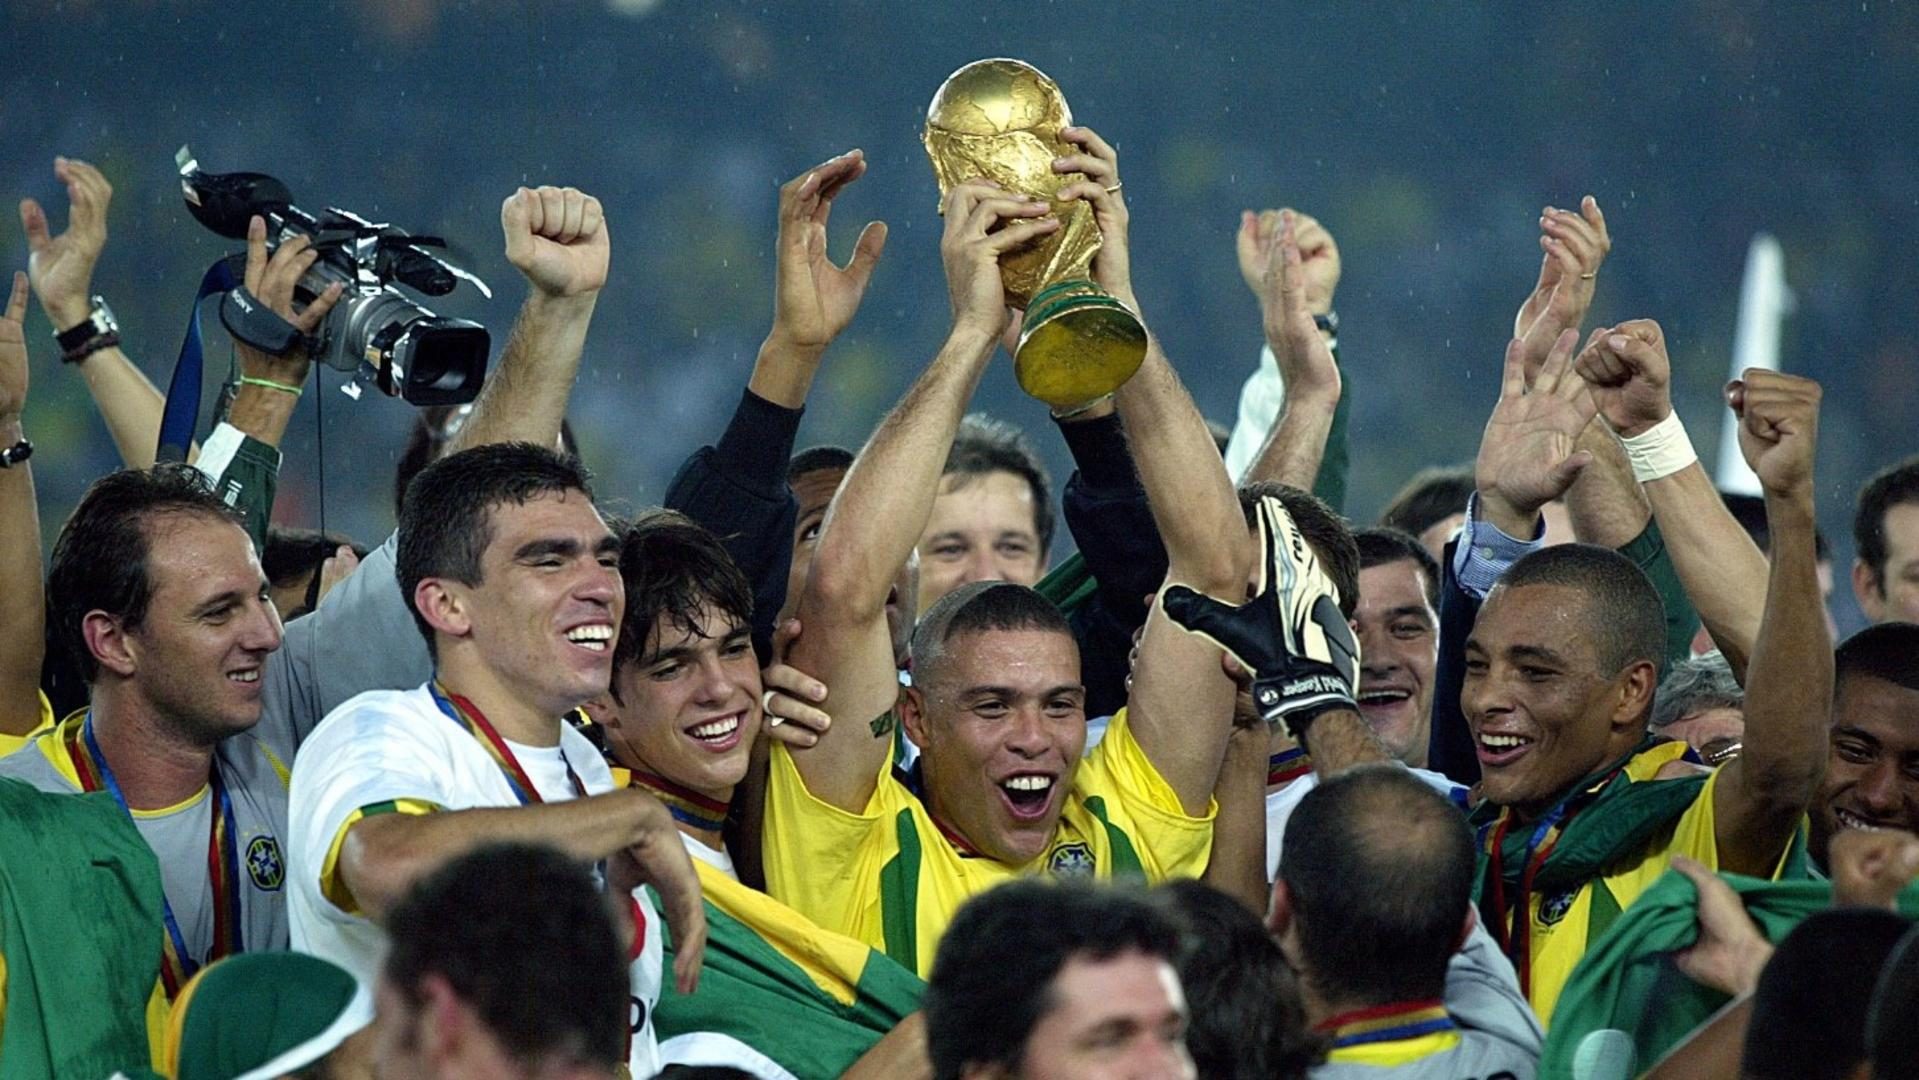 What Countries Have Never Won A FIFA World Cup?